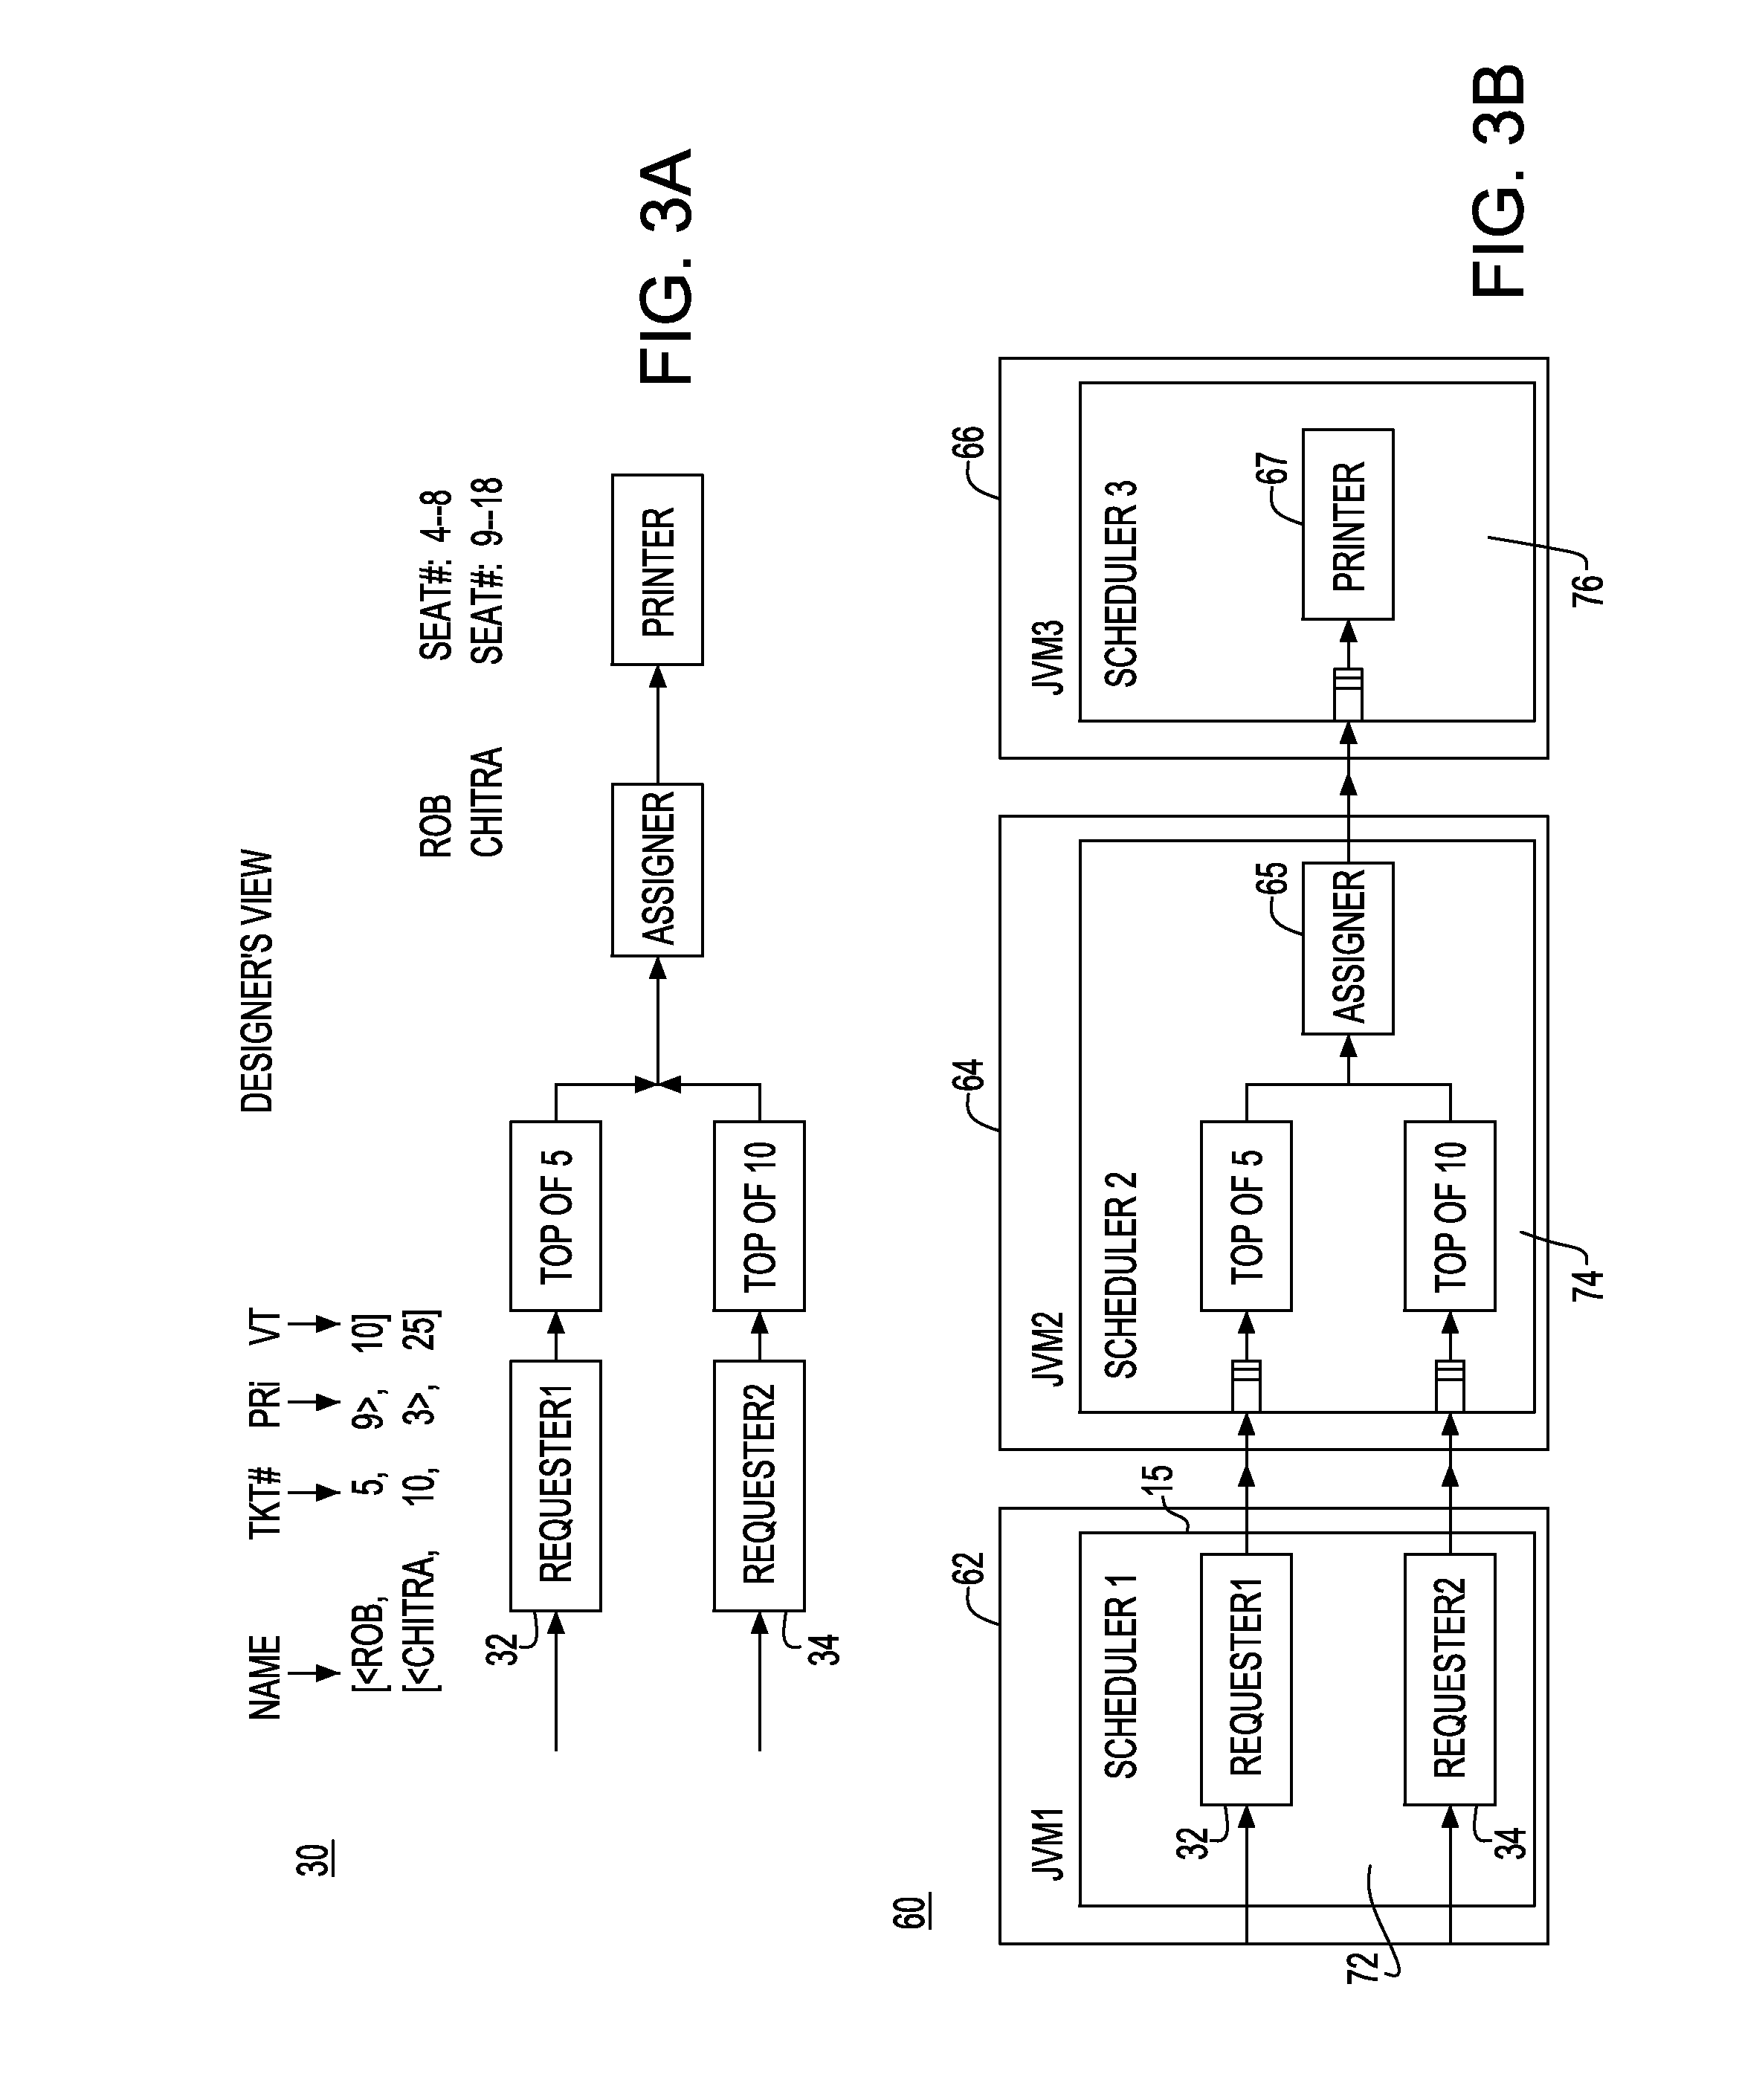 System and method for time-aware run-time to guarantee timeliness in component-oriented distributed systems